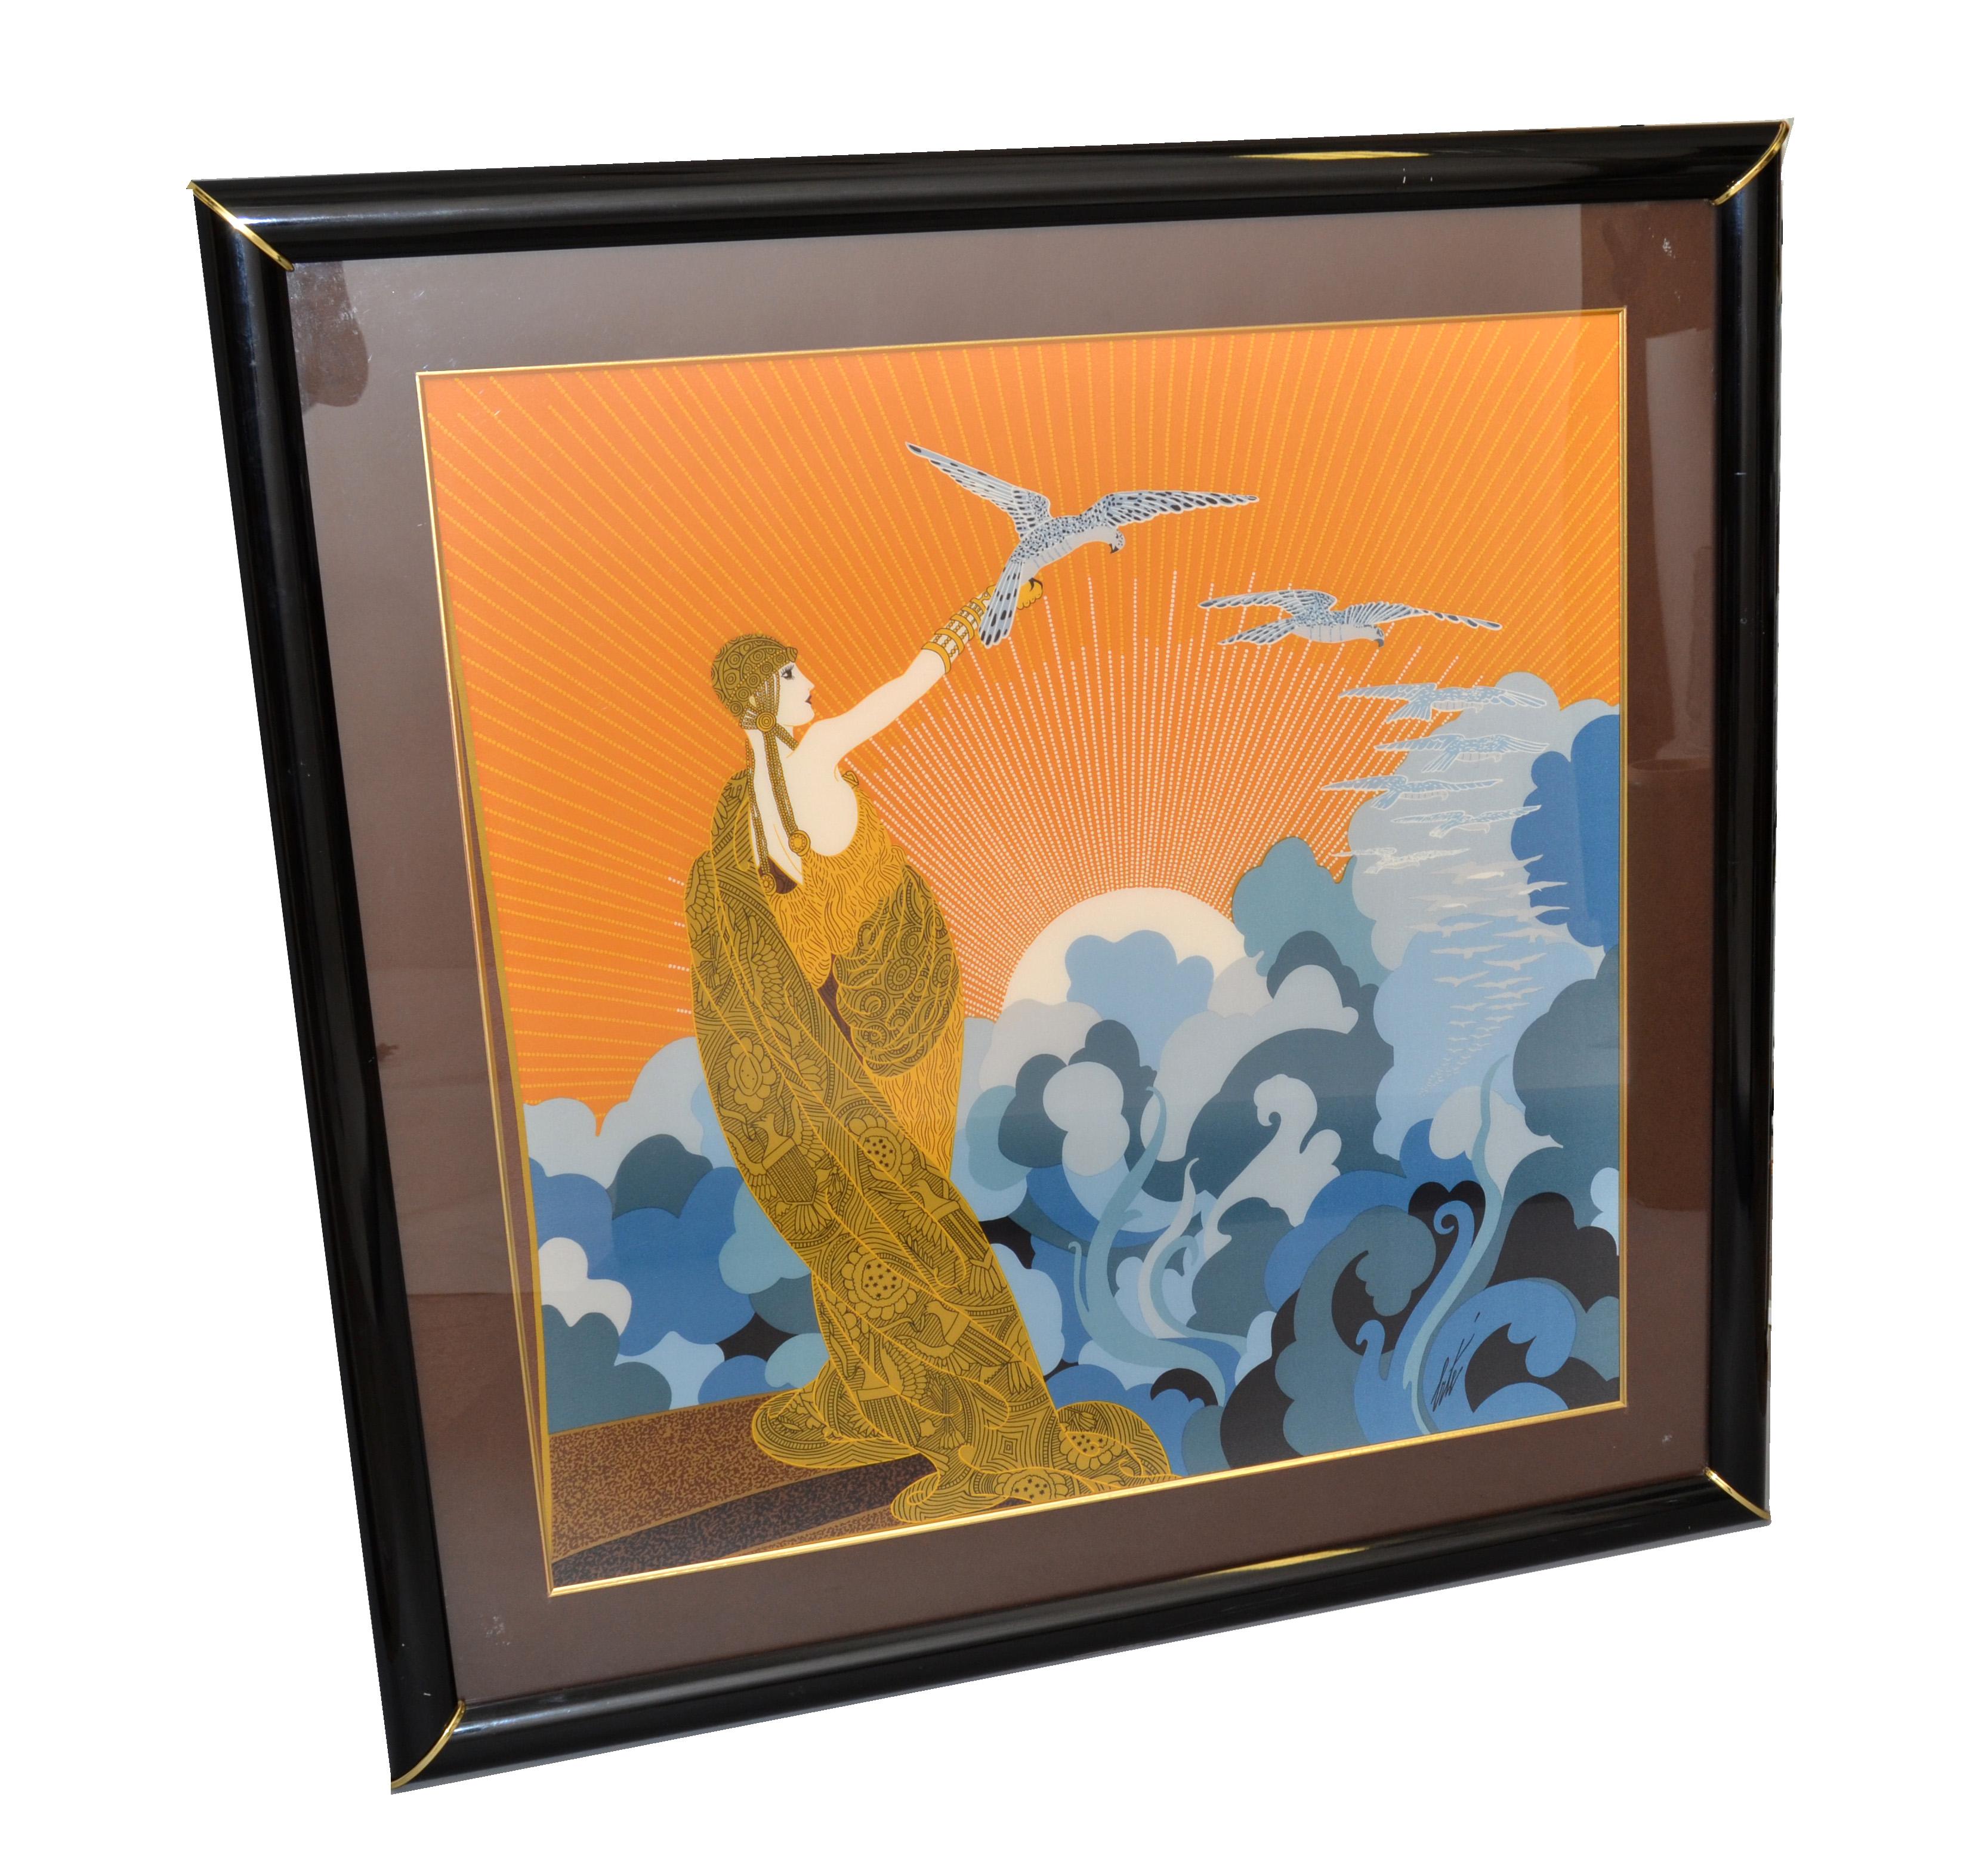 Art Deco Framed Silk Sarf by Erté, titled Wings of Victory made in the 1970.
Wood Frame with Brass Decor.
Signed on the Silk Scarf.
Silk Scarf Size measures: 31.75 x 32 inches.
Romain de Tirtoff was a Russian-born French artist and designer